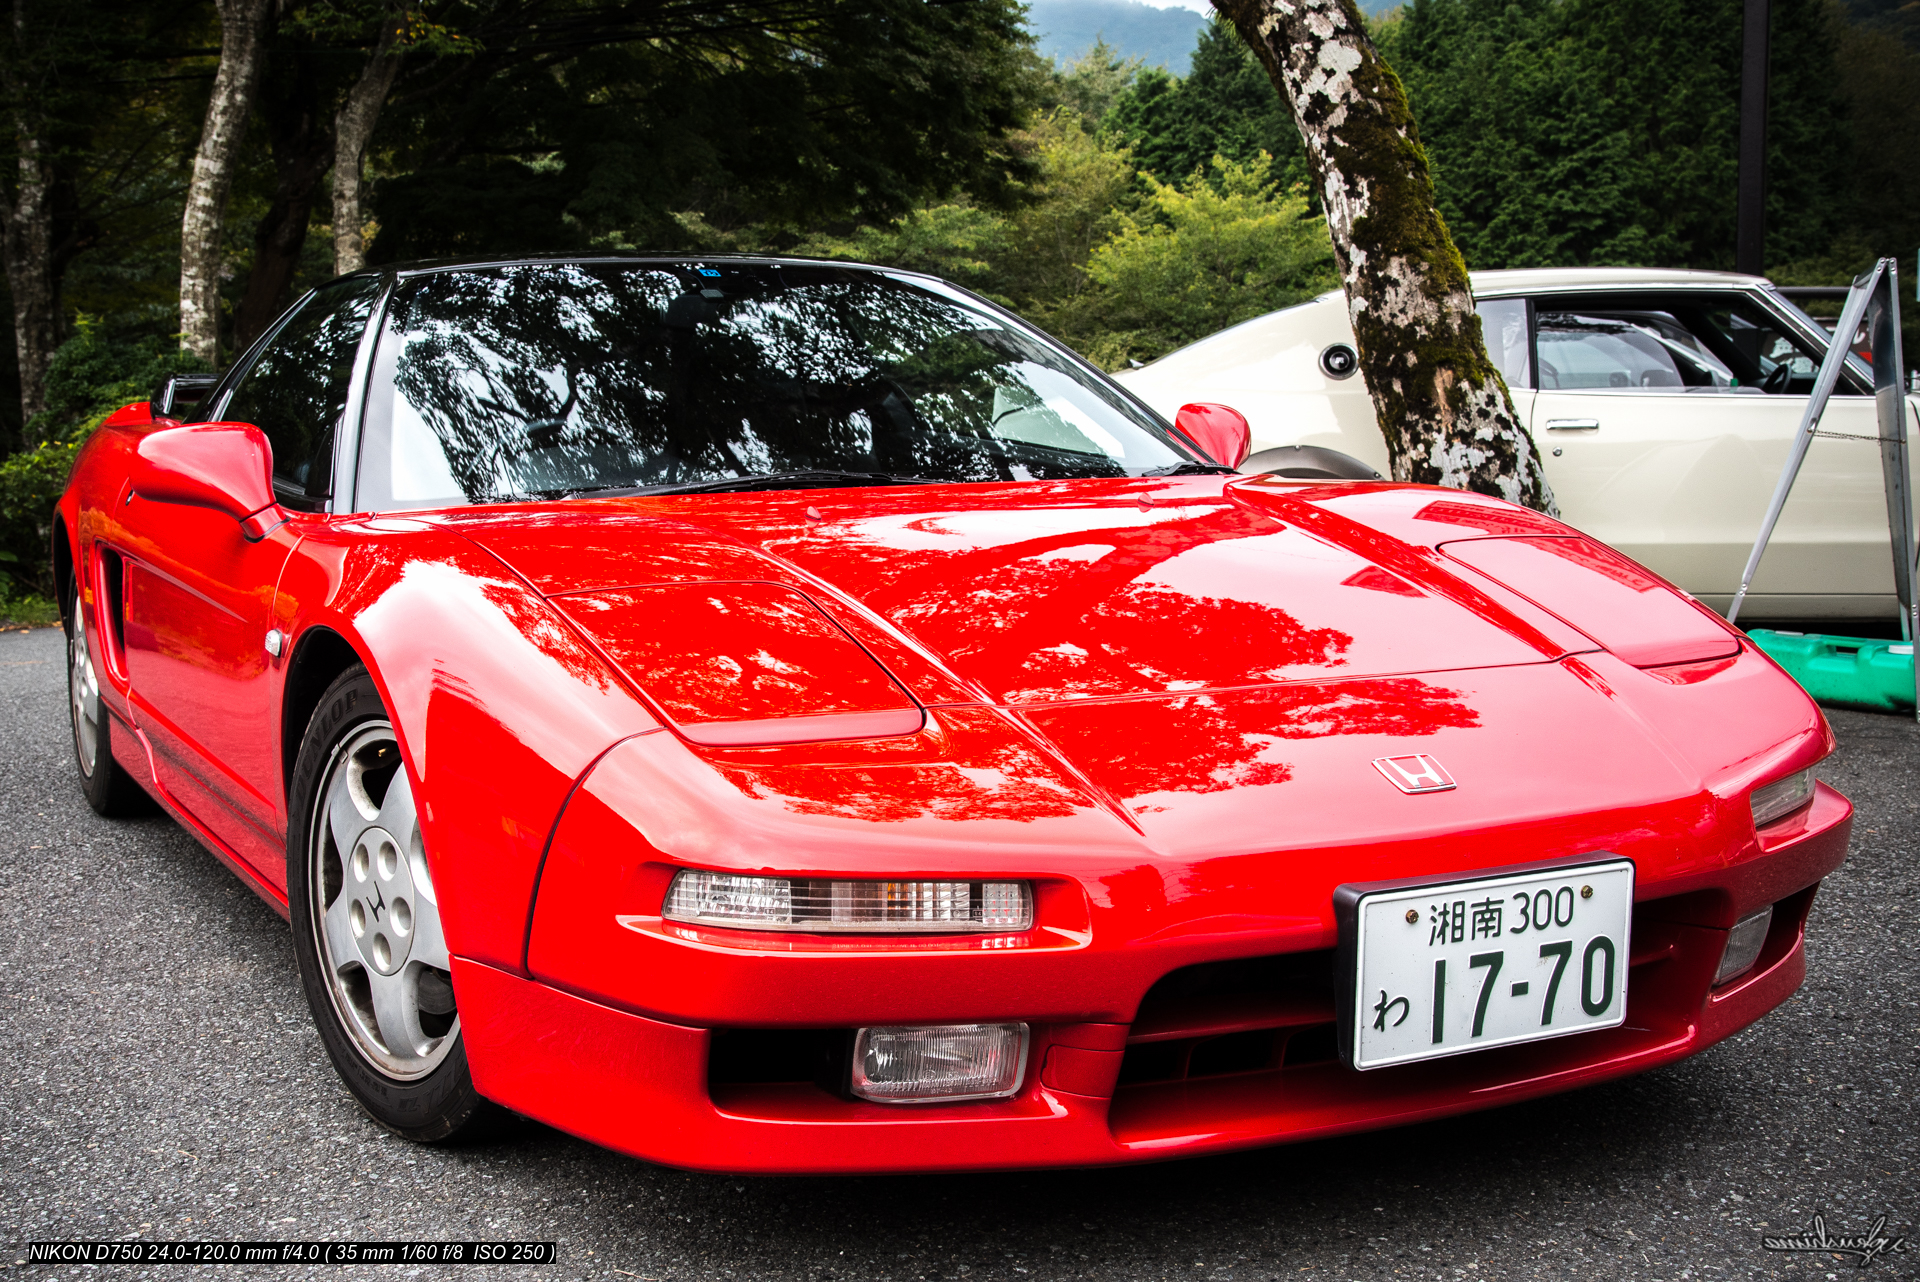 THE OLD NSX